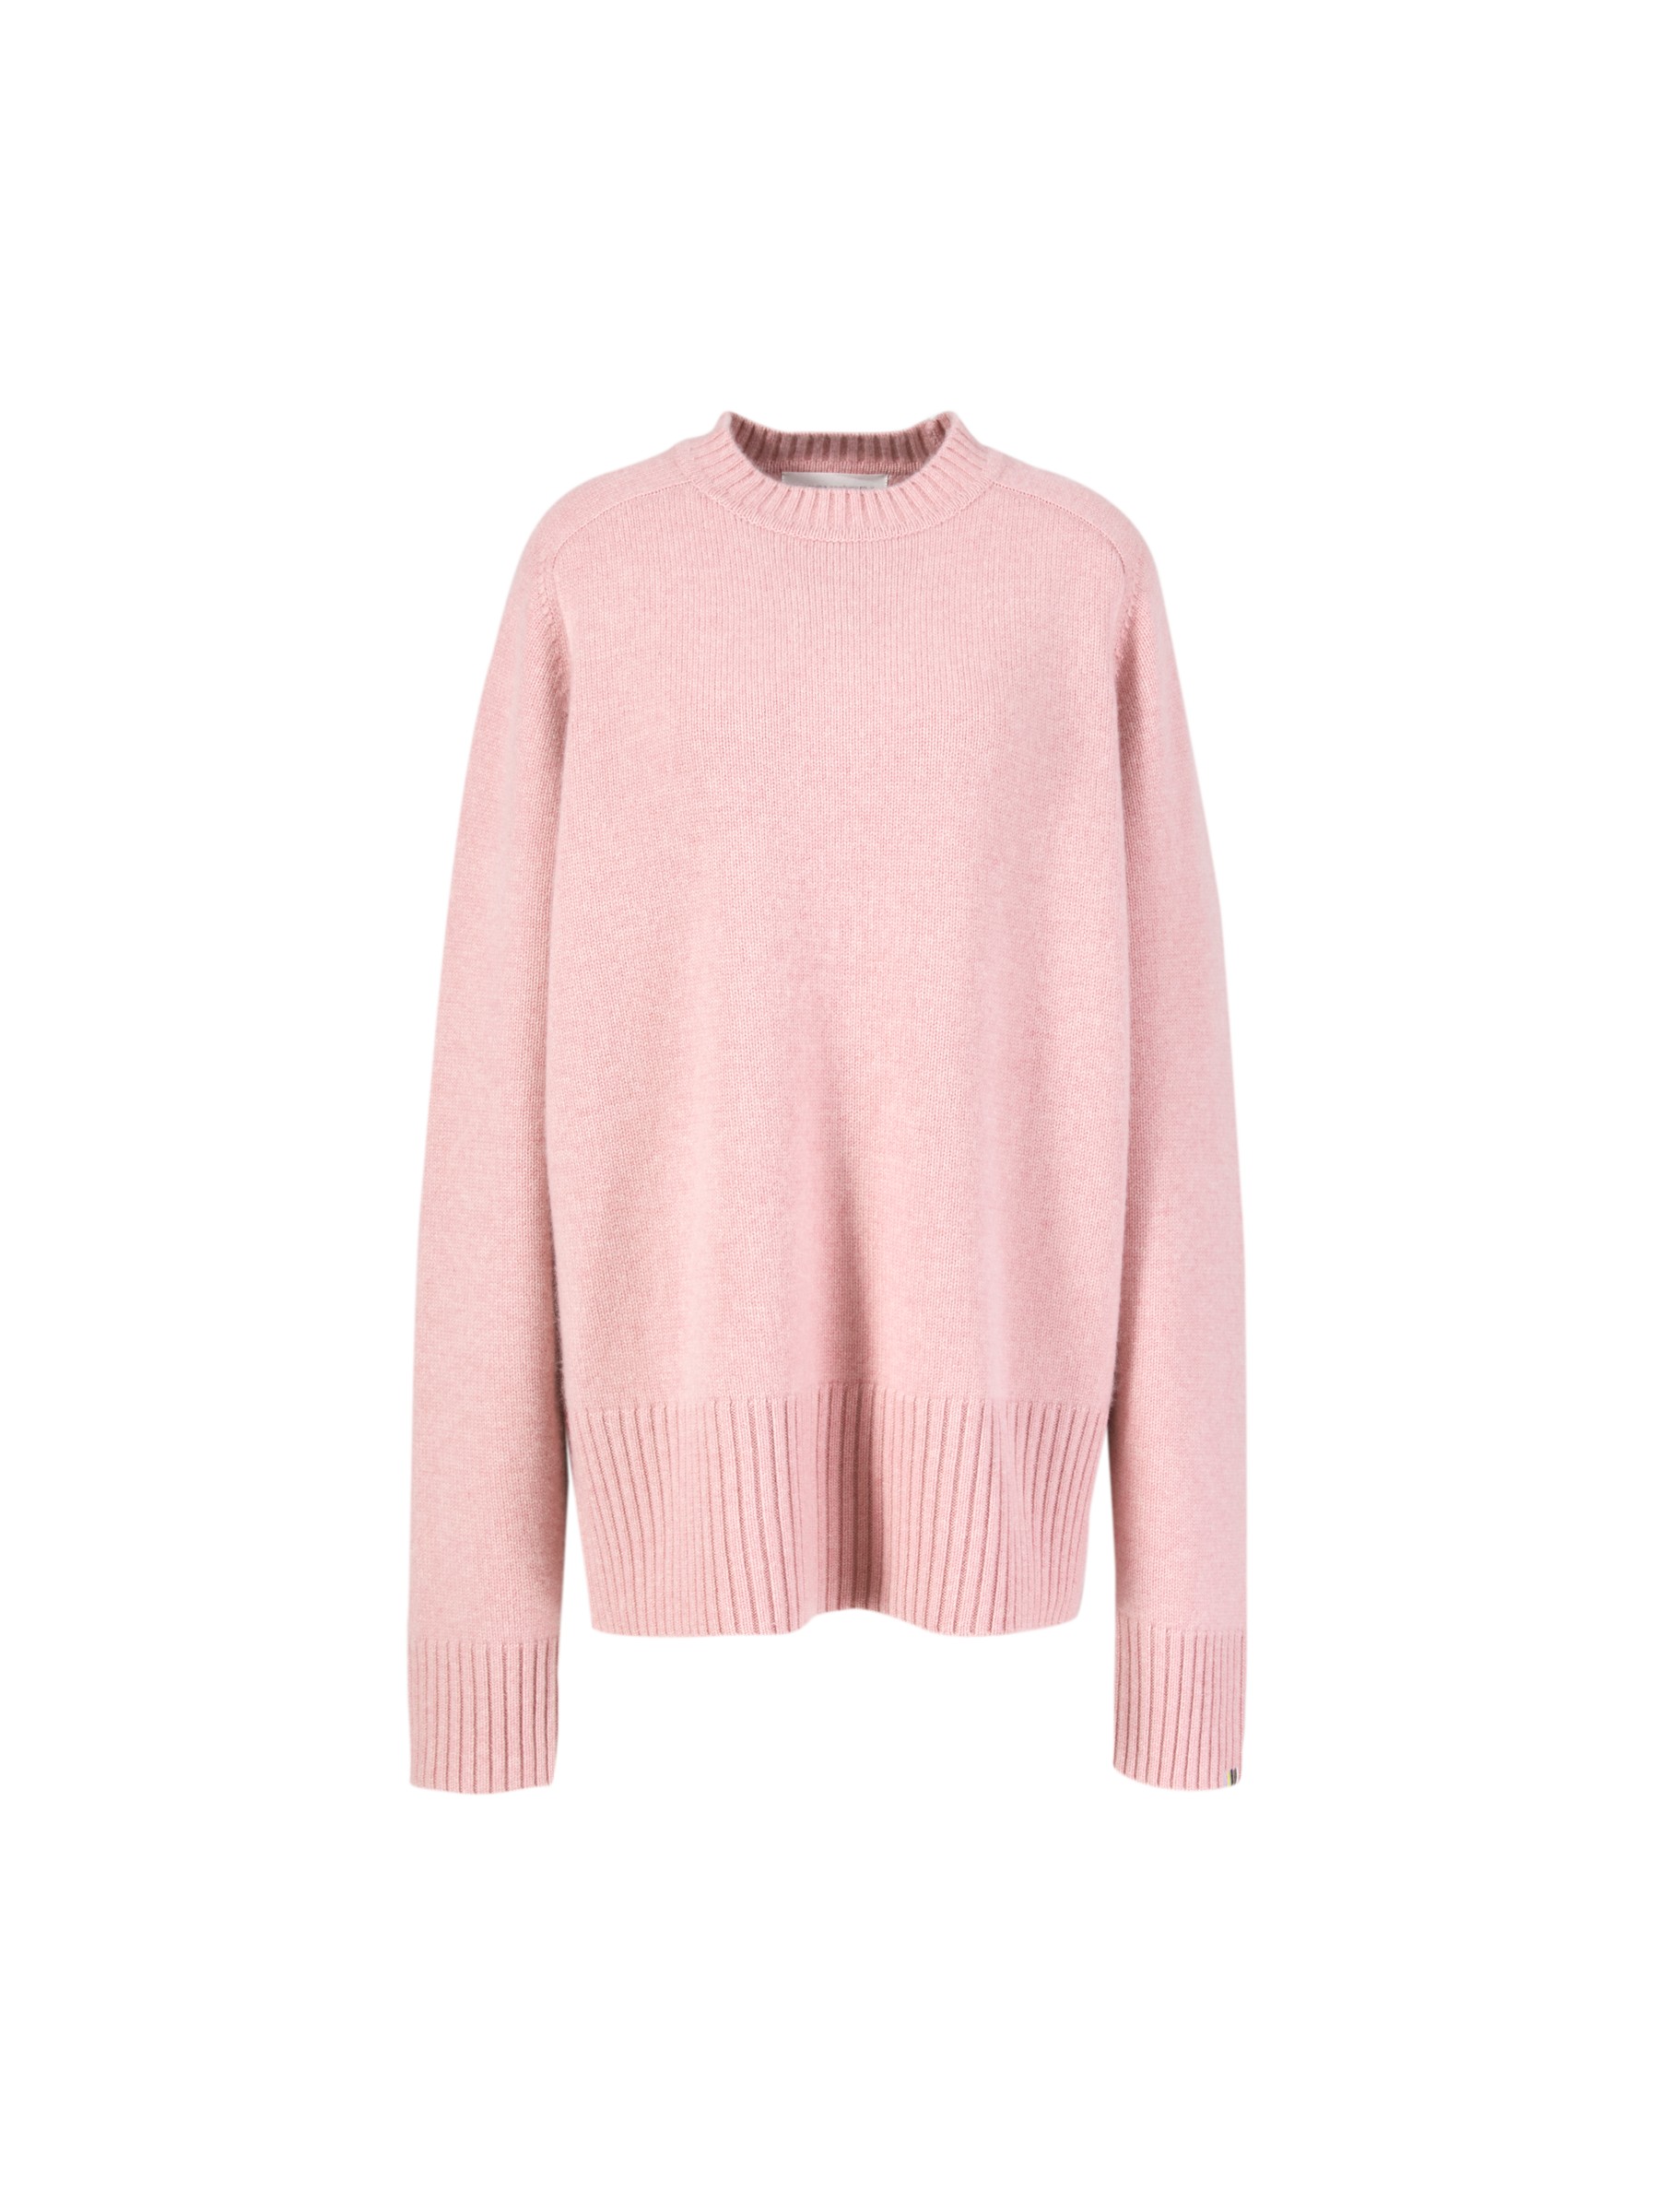 Womens Jumpers and knitwear Extreme Cashmere Jumpers and knitwear Extreme Cashmere N° 80 Glory Cashmere Sweater in Pink 